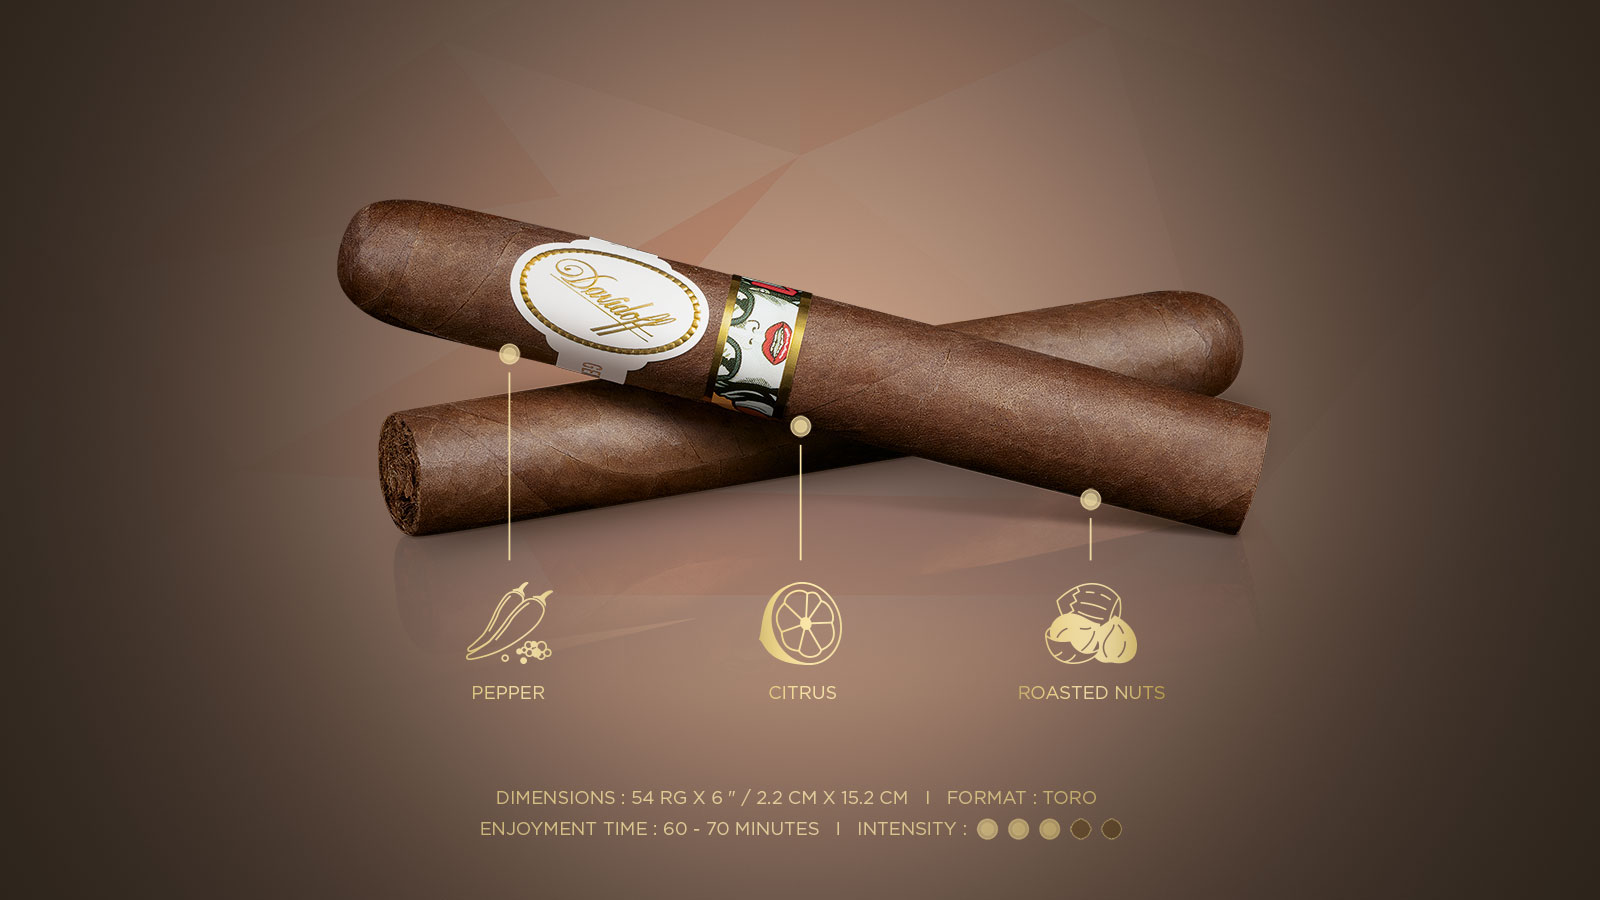 Two cigars which come with the Davidoff & Boyarde Masterpiece Humidor Classically Noir with blend details displayed, such as main aromas, enjoyment time and intensity.